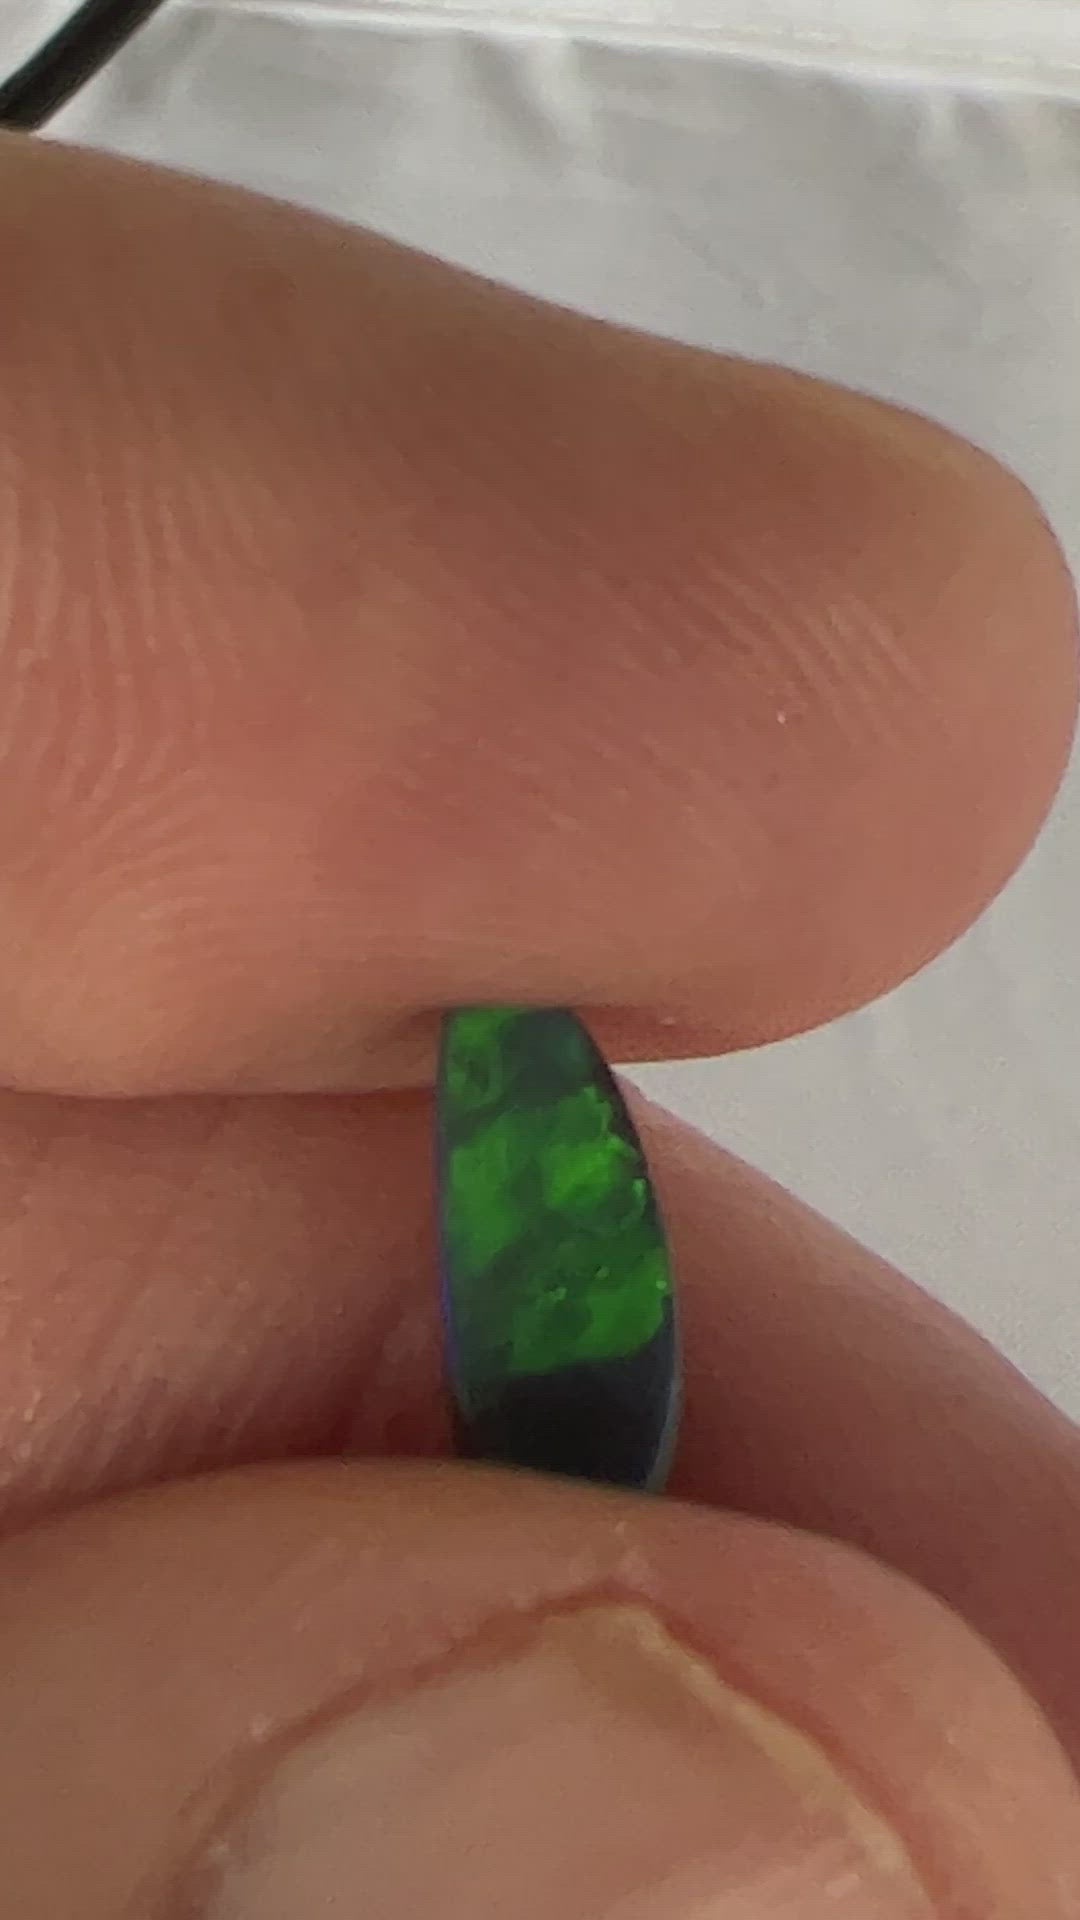 Lightning Ridge solid black opal with wonderful greens. Would make a beautiful ring.